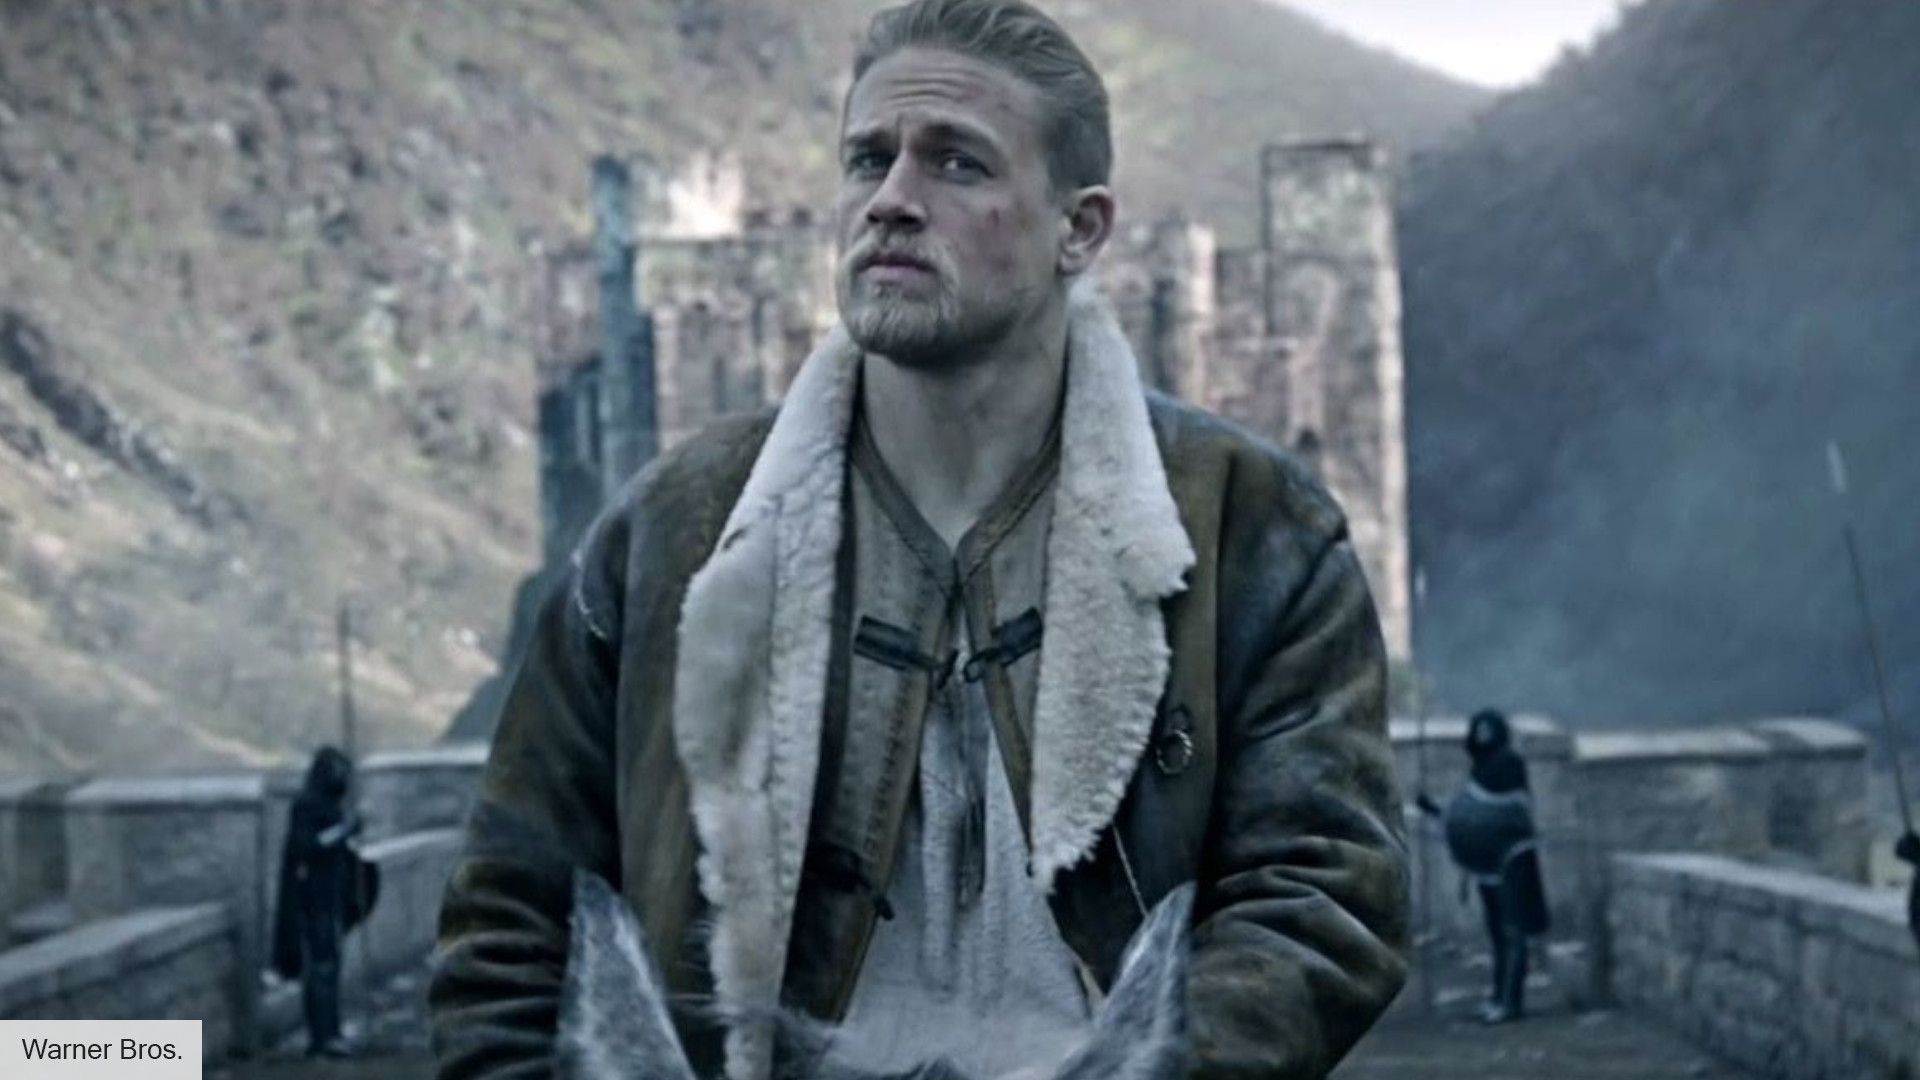 King Arthur Legend of the Sword is the most watched thing on Netflix